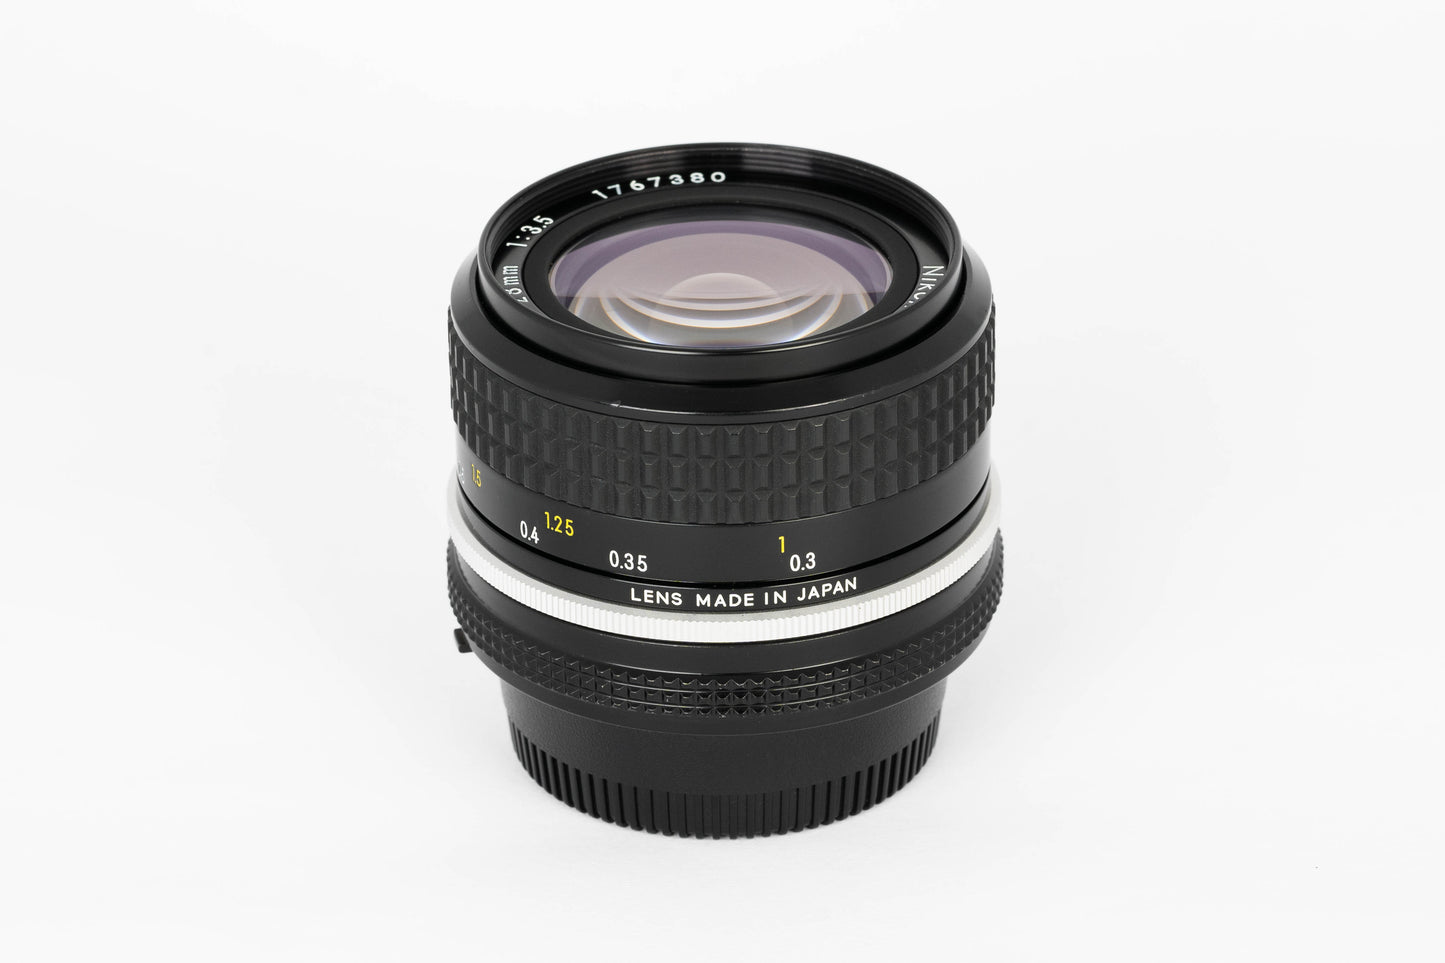 Nikon Ai Nikkor 28mm f/3.5 Manual Focus Wide Angle Lens From JAPAN